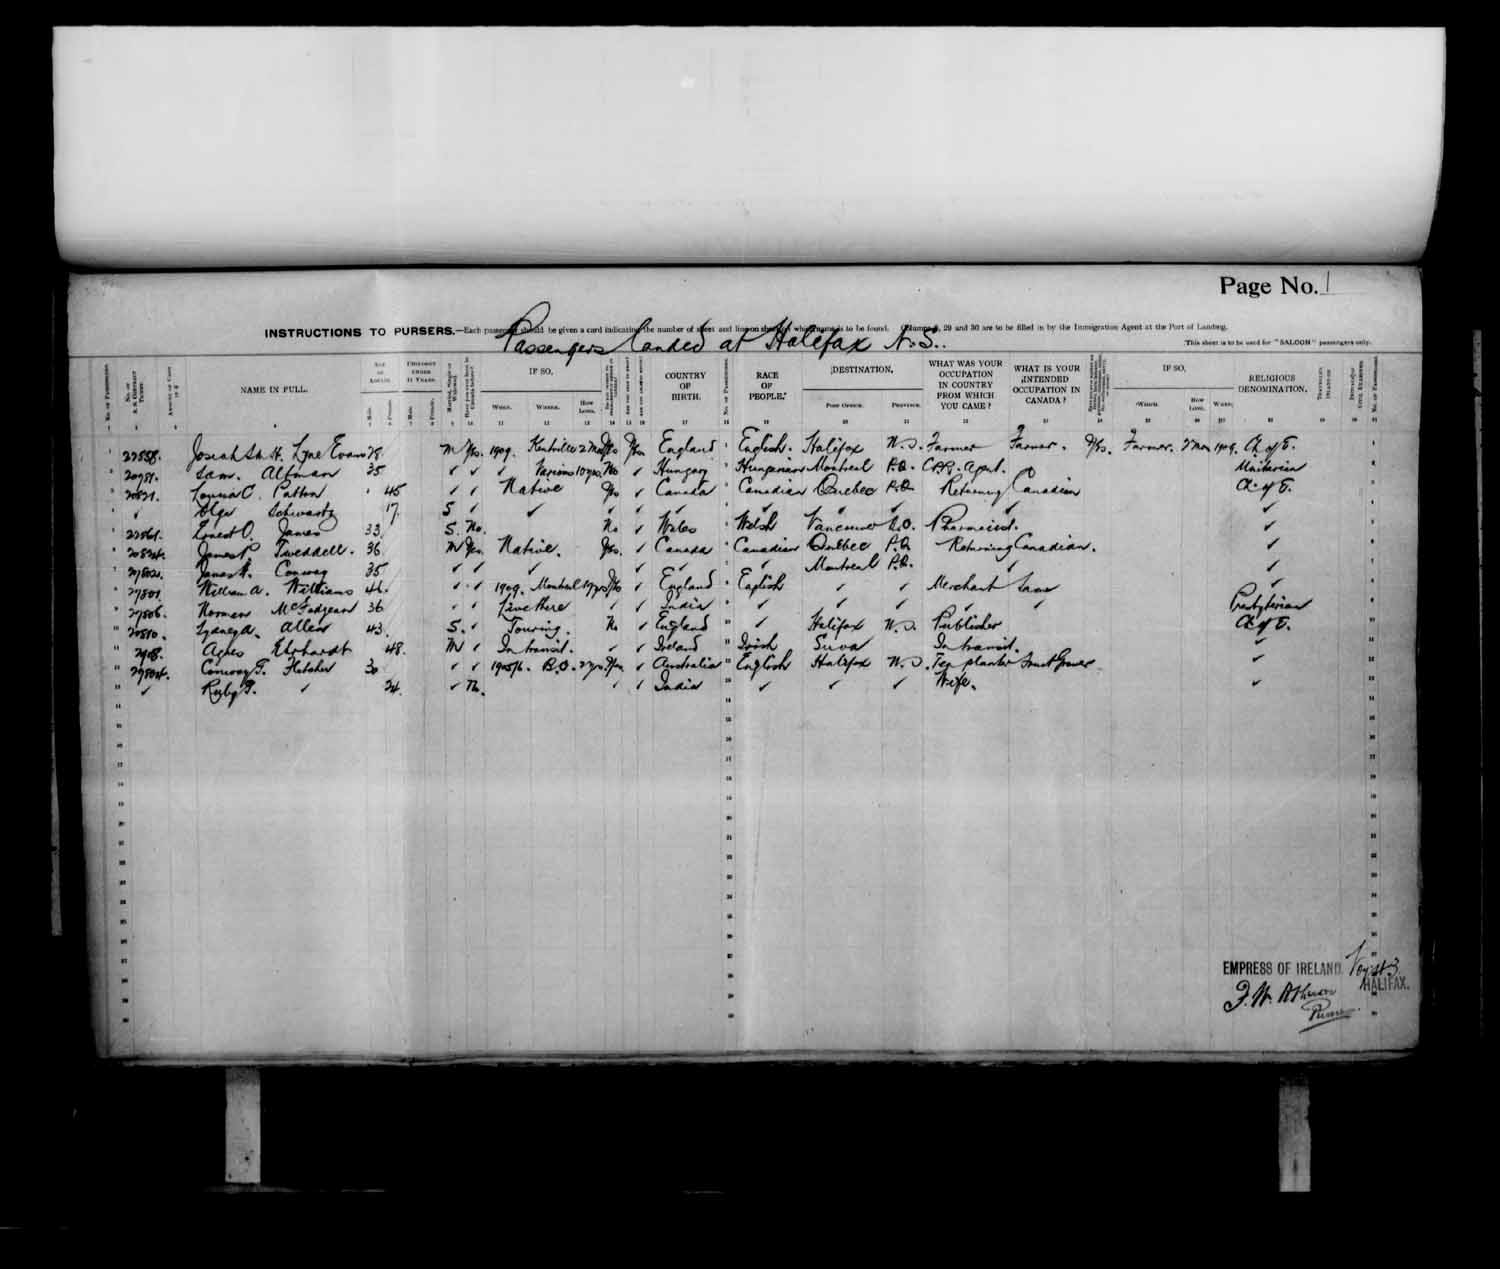 Digitized page of Quebec Passenger Lists for Image No.: e003683614